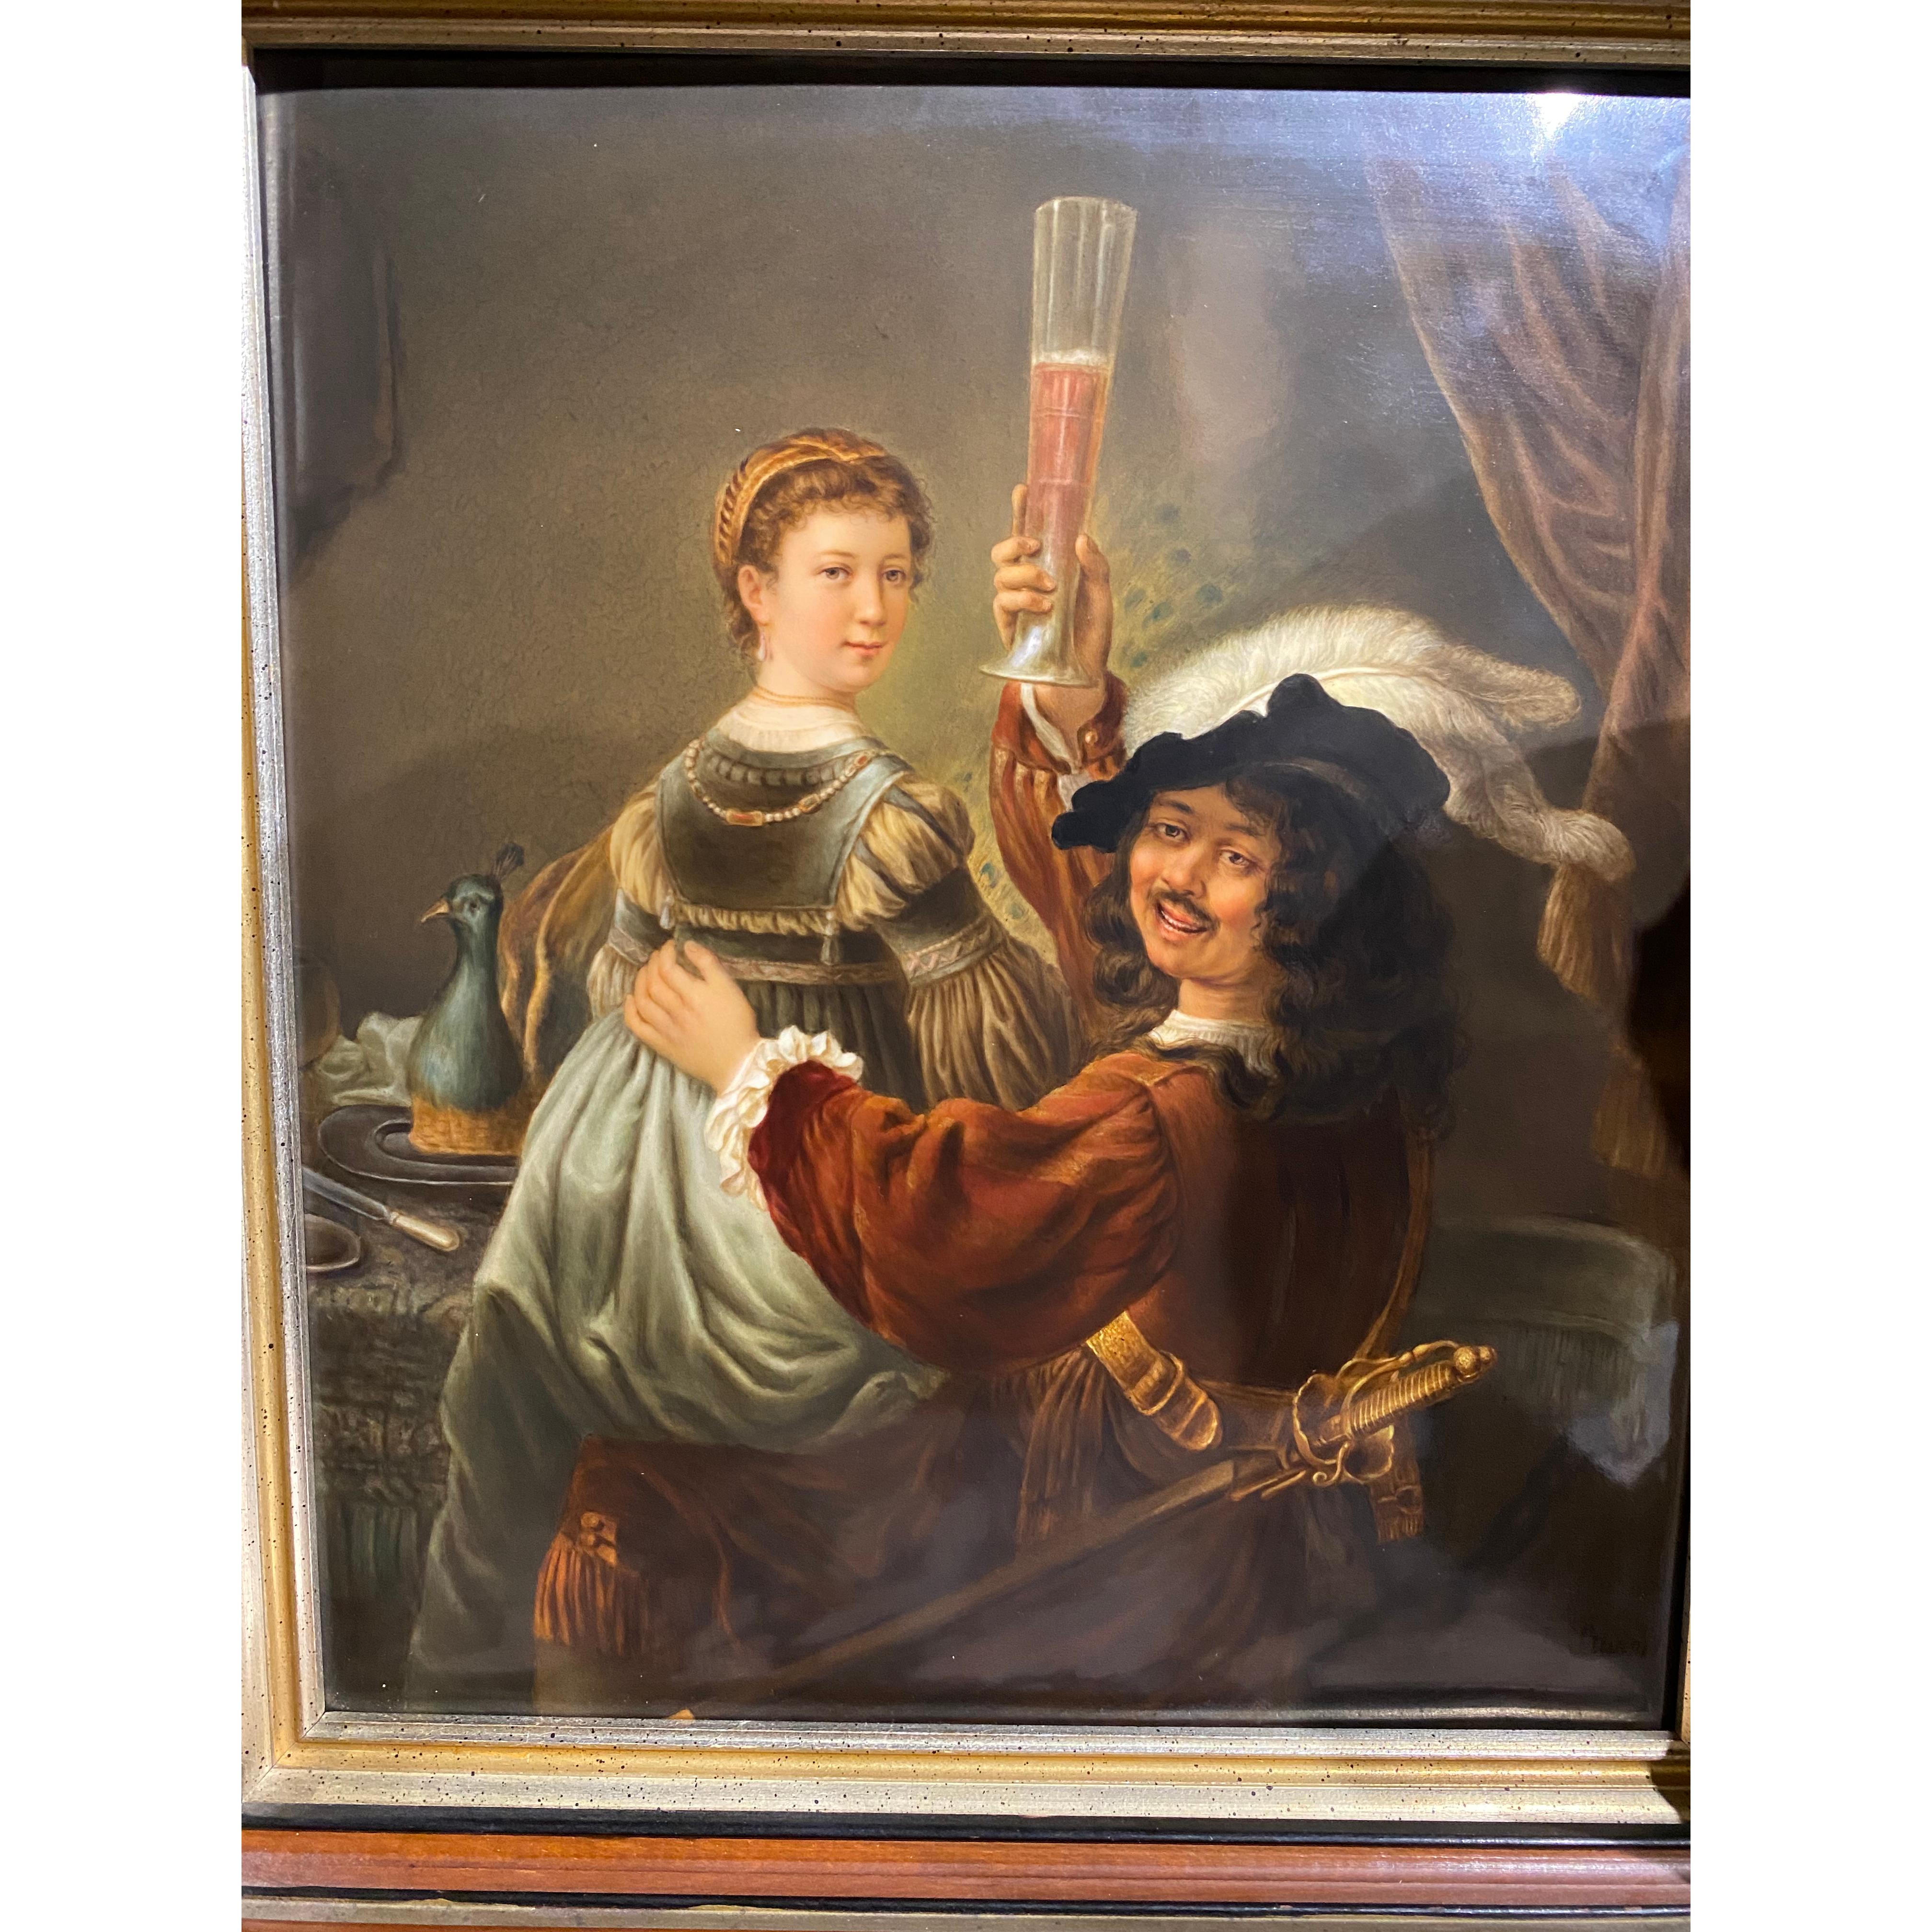 Finely painted after Rembrandt with a self-portrait of the artist and his spouse, Saskia, in a tavern, in the guise of the Prodigal Son

LATE 19TH CENTURY, IMPRESSED MONOGRAM AND SCEPTRE MARK AND H, INCISED 15-13, SIGNED L. STURM

Origin: